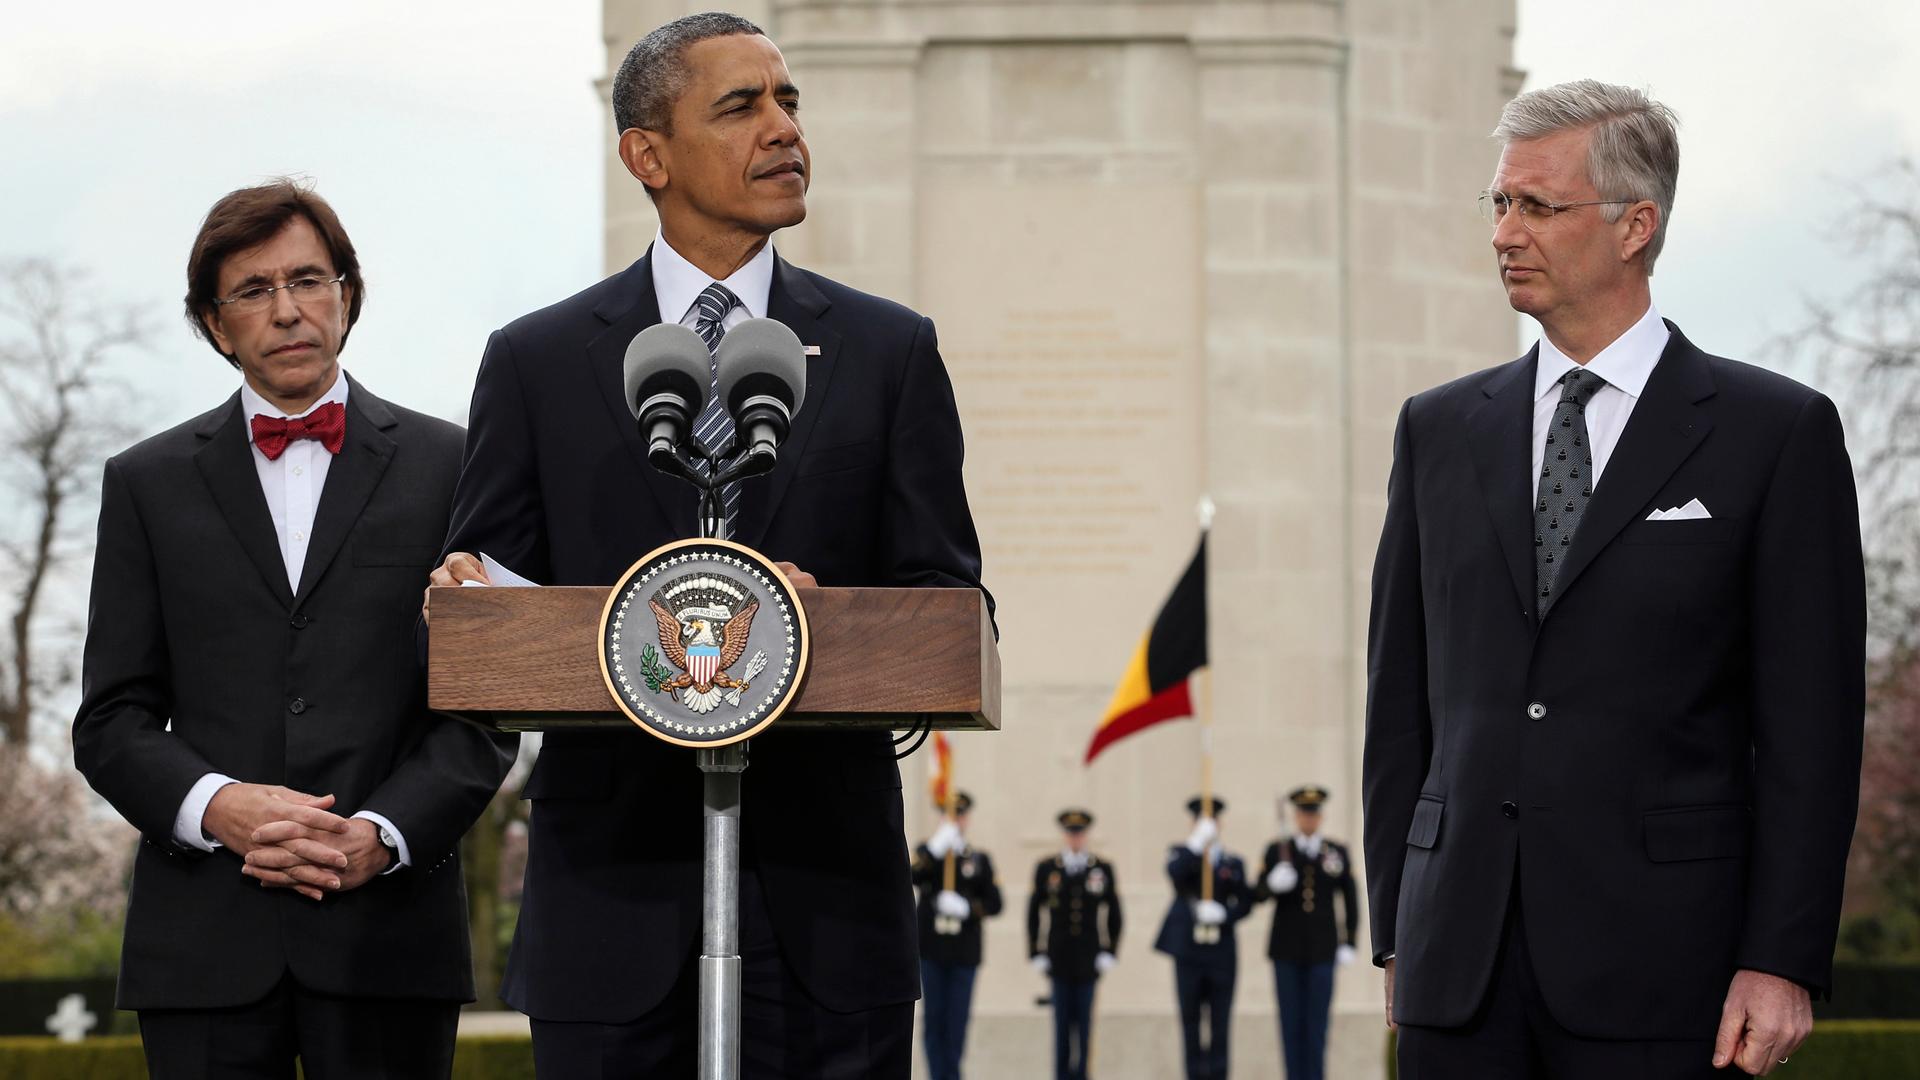 President Obama reminded Europeans Wednesday that "freedom isn't free,"  while visiting a US World War One Cemetery in Waregem, Belgium. He is flanked by Belgium's King Philippe (R) and Belgium's Prime Minister Elio Di Rupo.